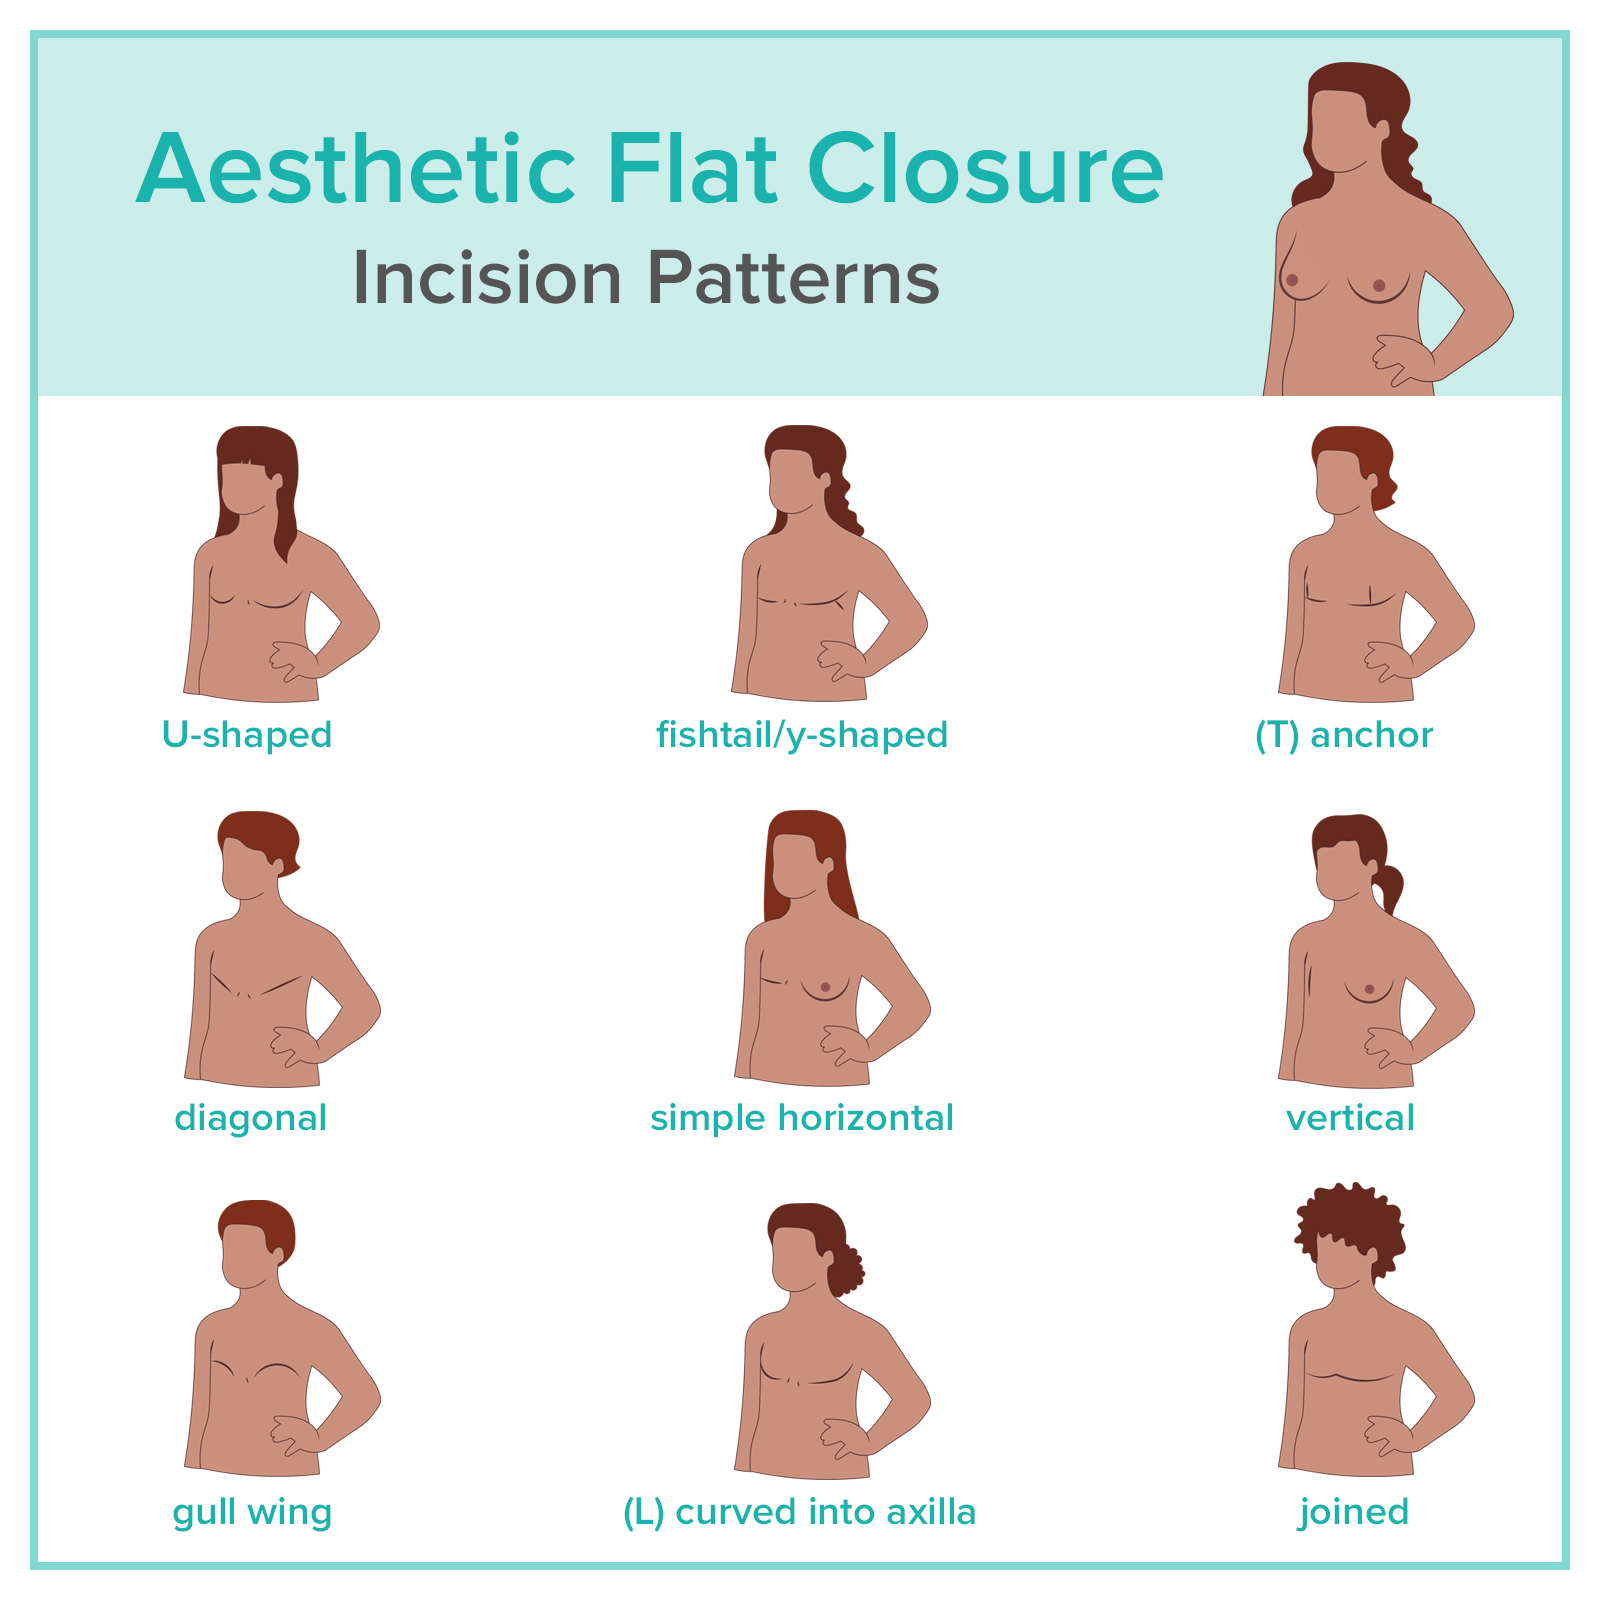 What is an Aesthetic Flat Closure